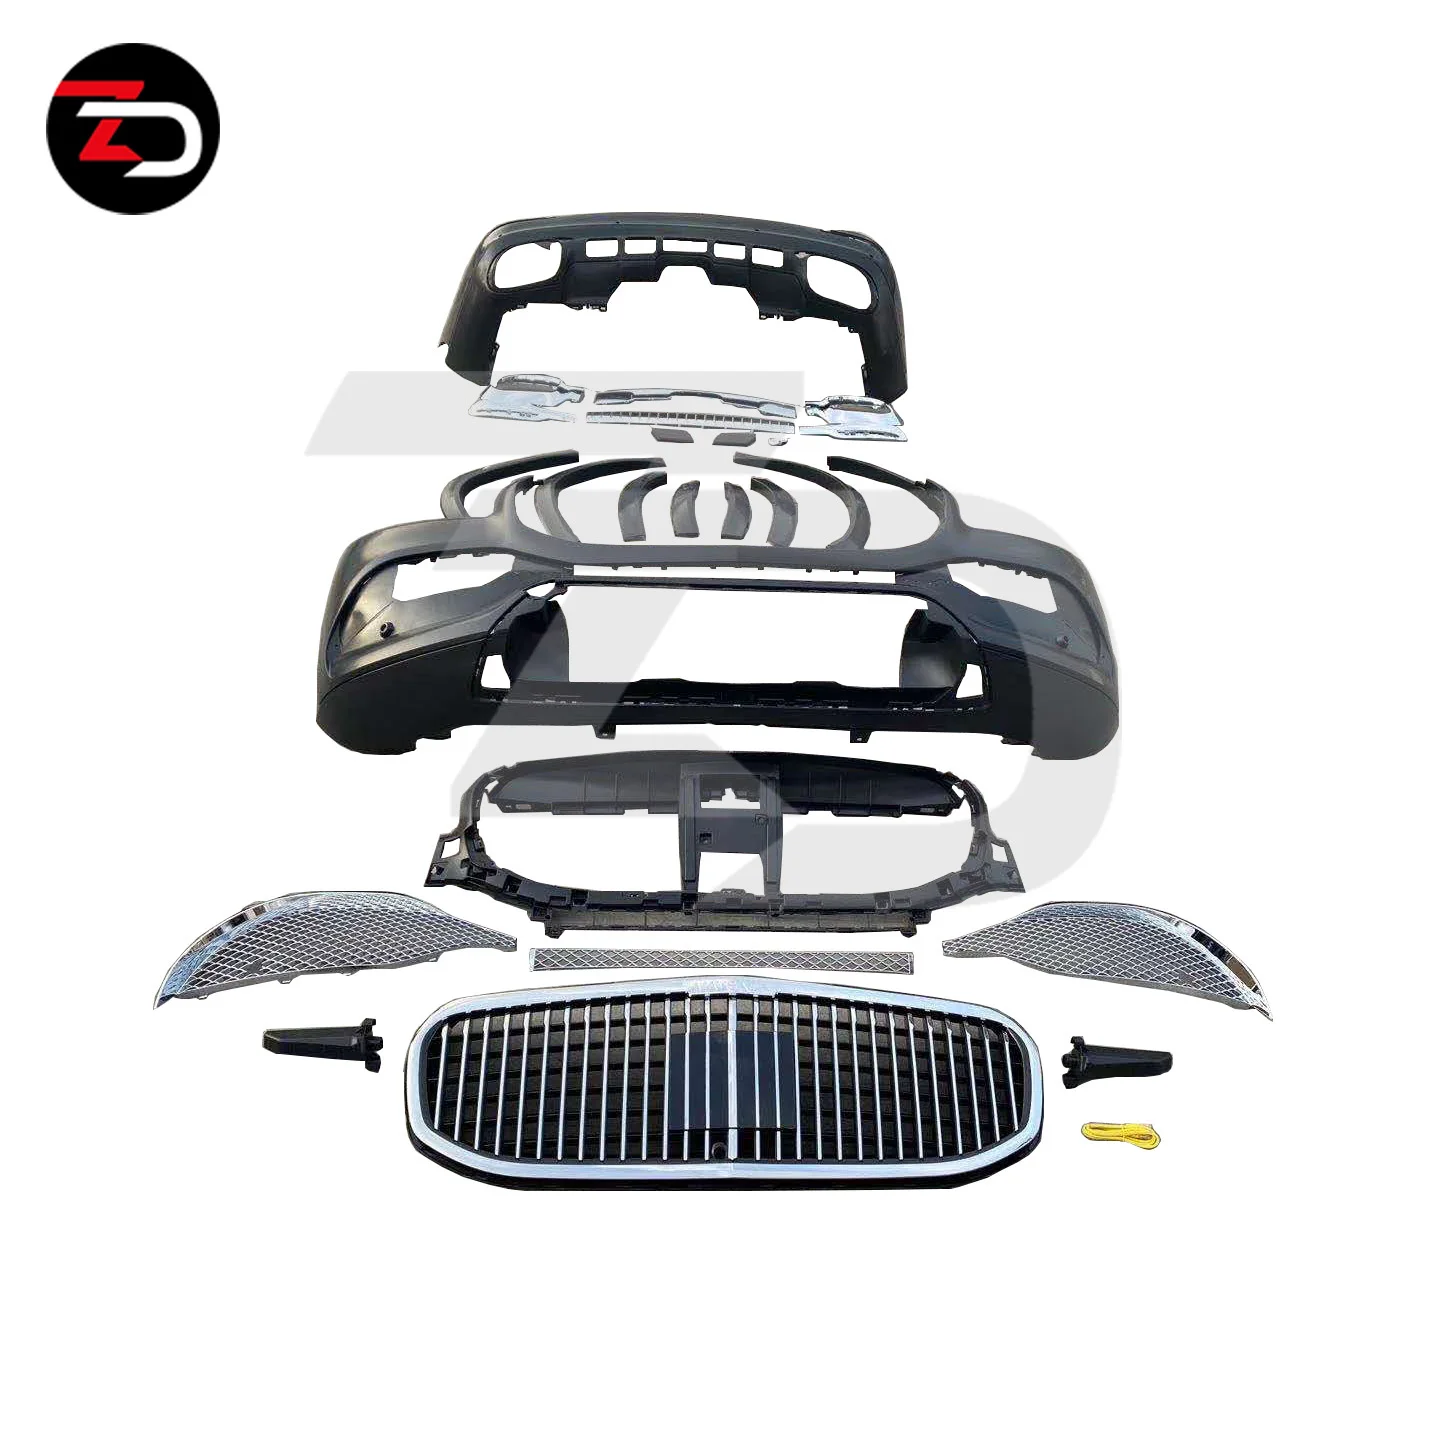 Car Accessories for Benz GLS X167 2020 Change to Maybach Model Include  Front and Rear Bumper Assembly with Grille Eyebrows and Exhaust Pipes -  China Car Accessories, Bumper